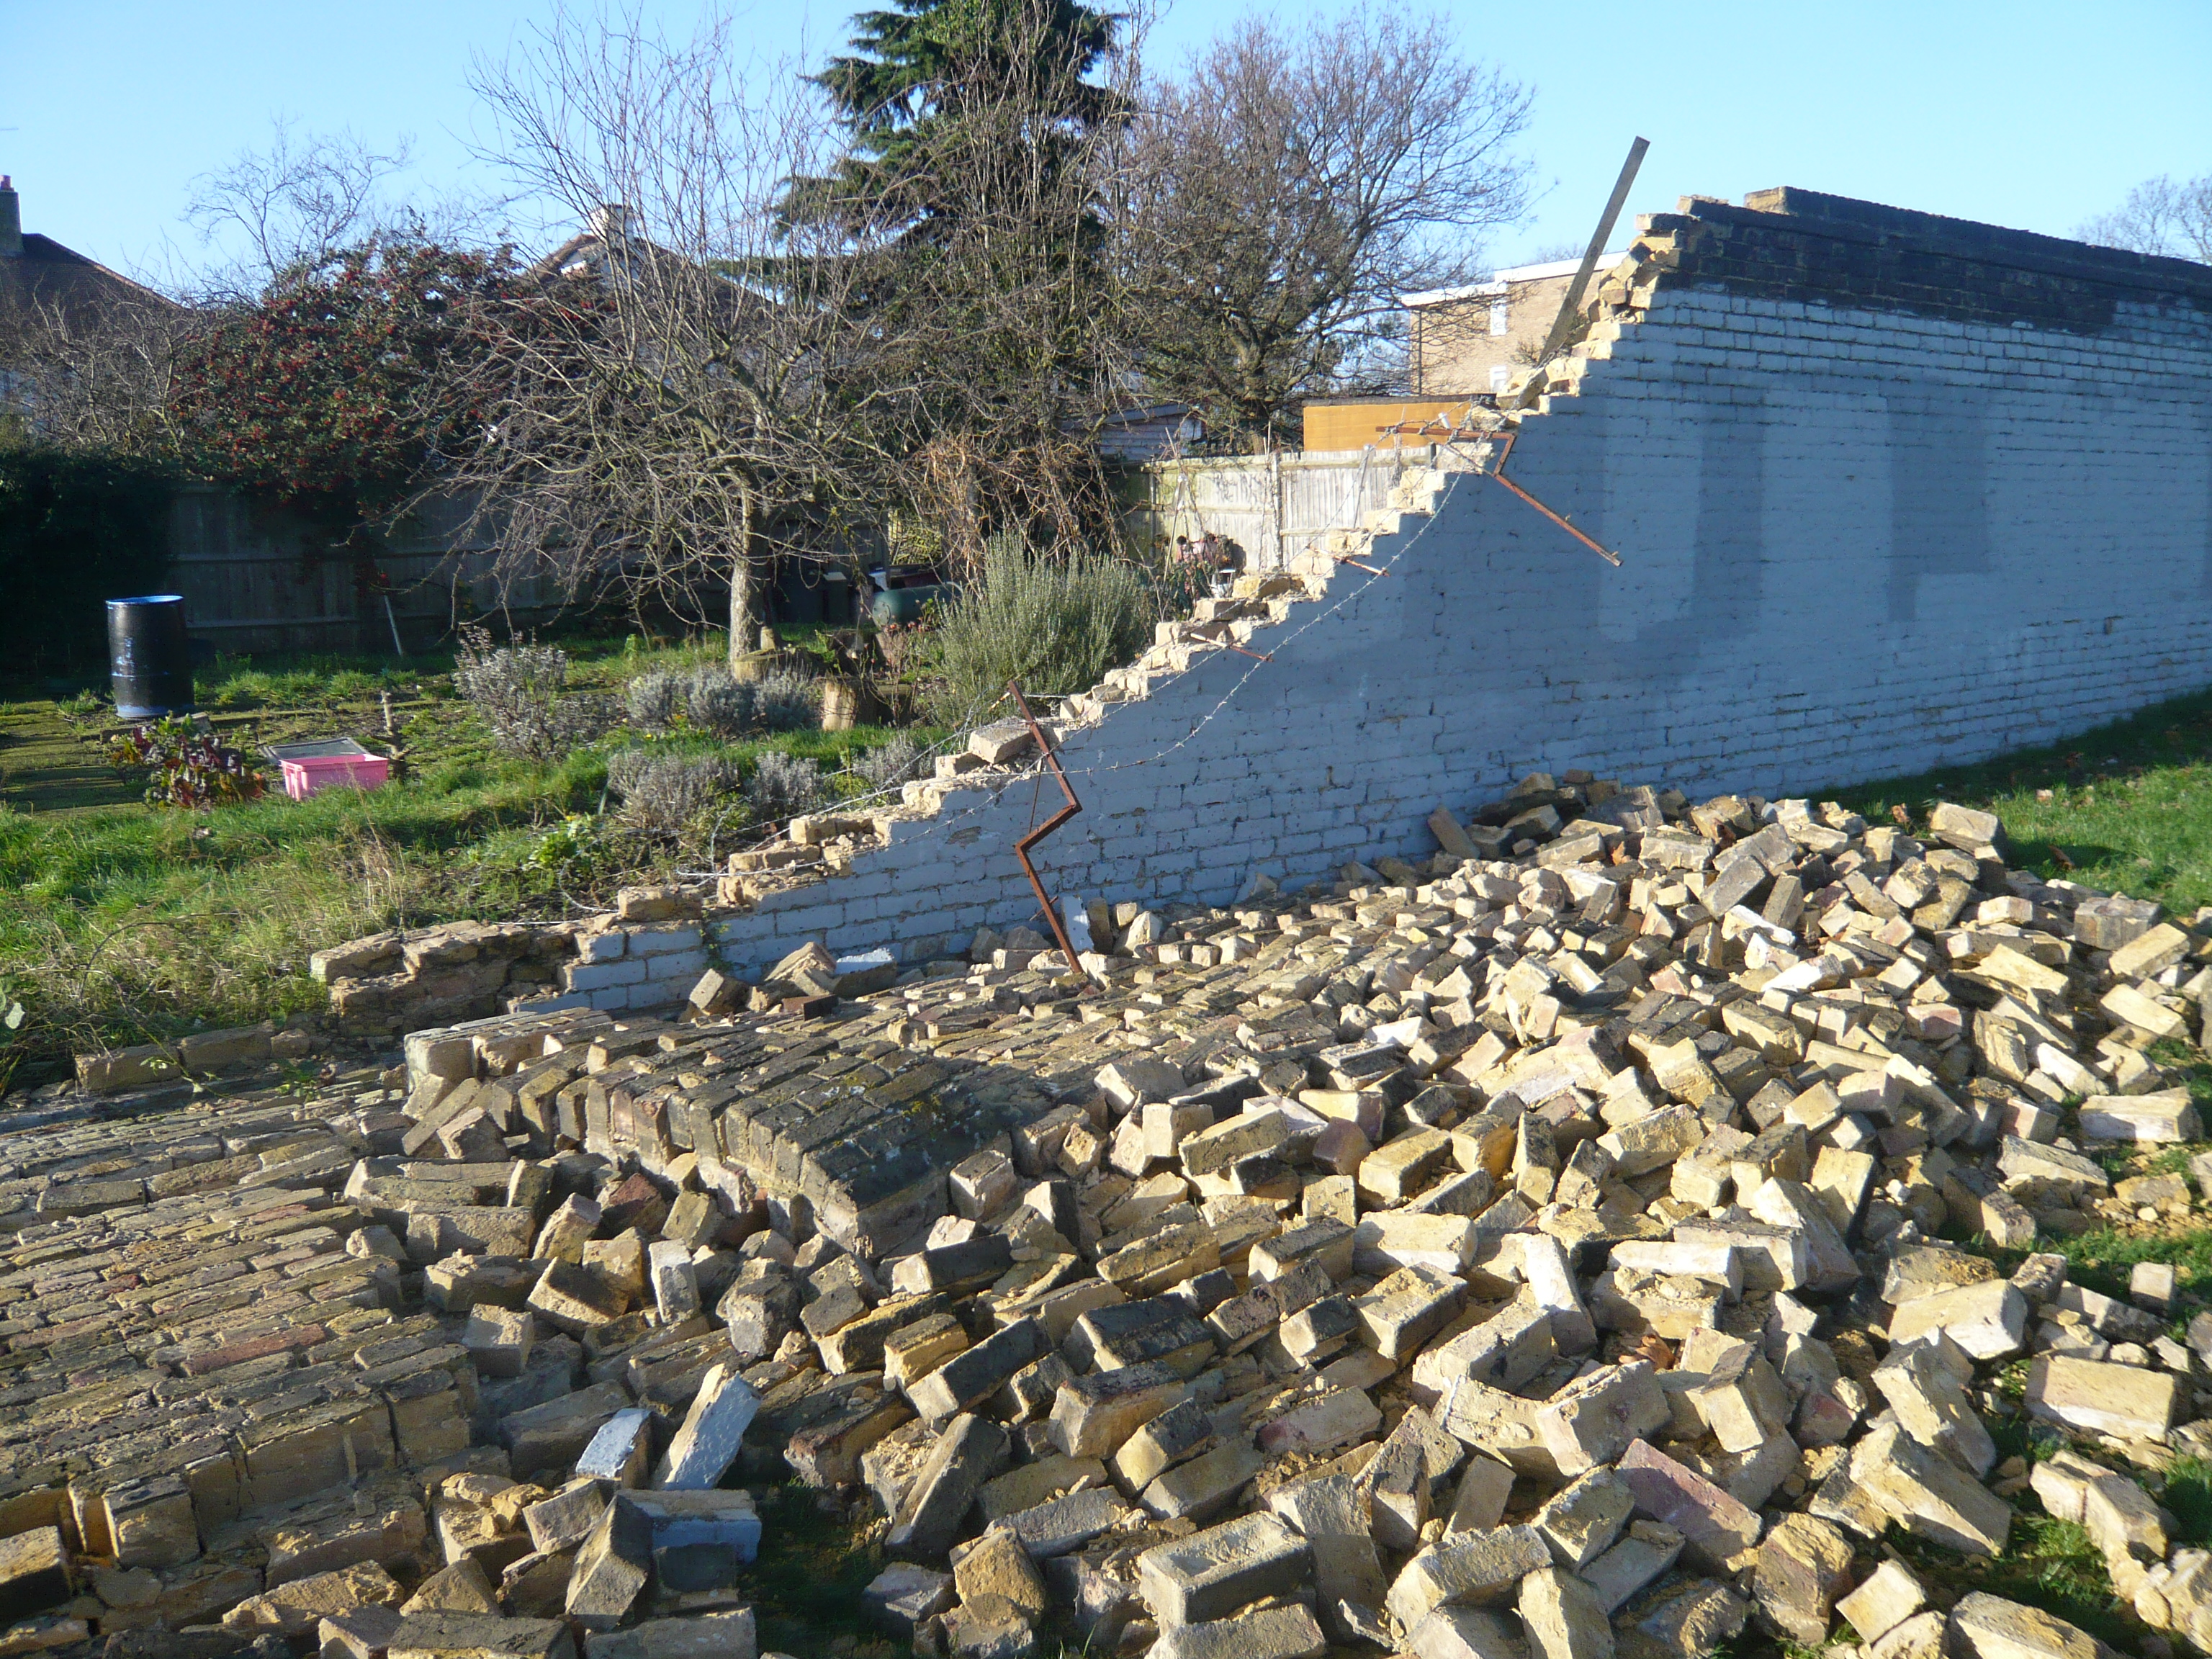 Bricking it: Council refuses to rebuild wall to “save” £50,000 ...